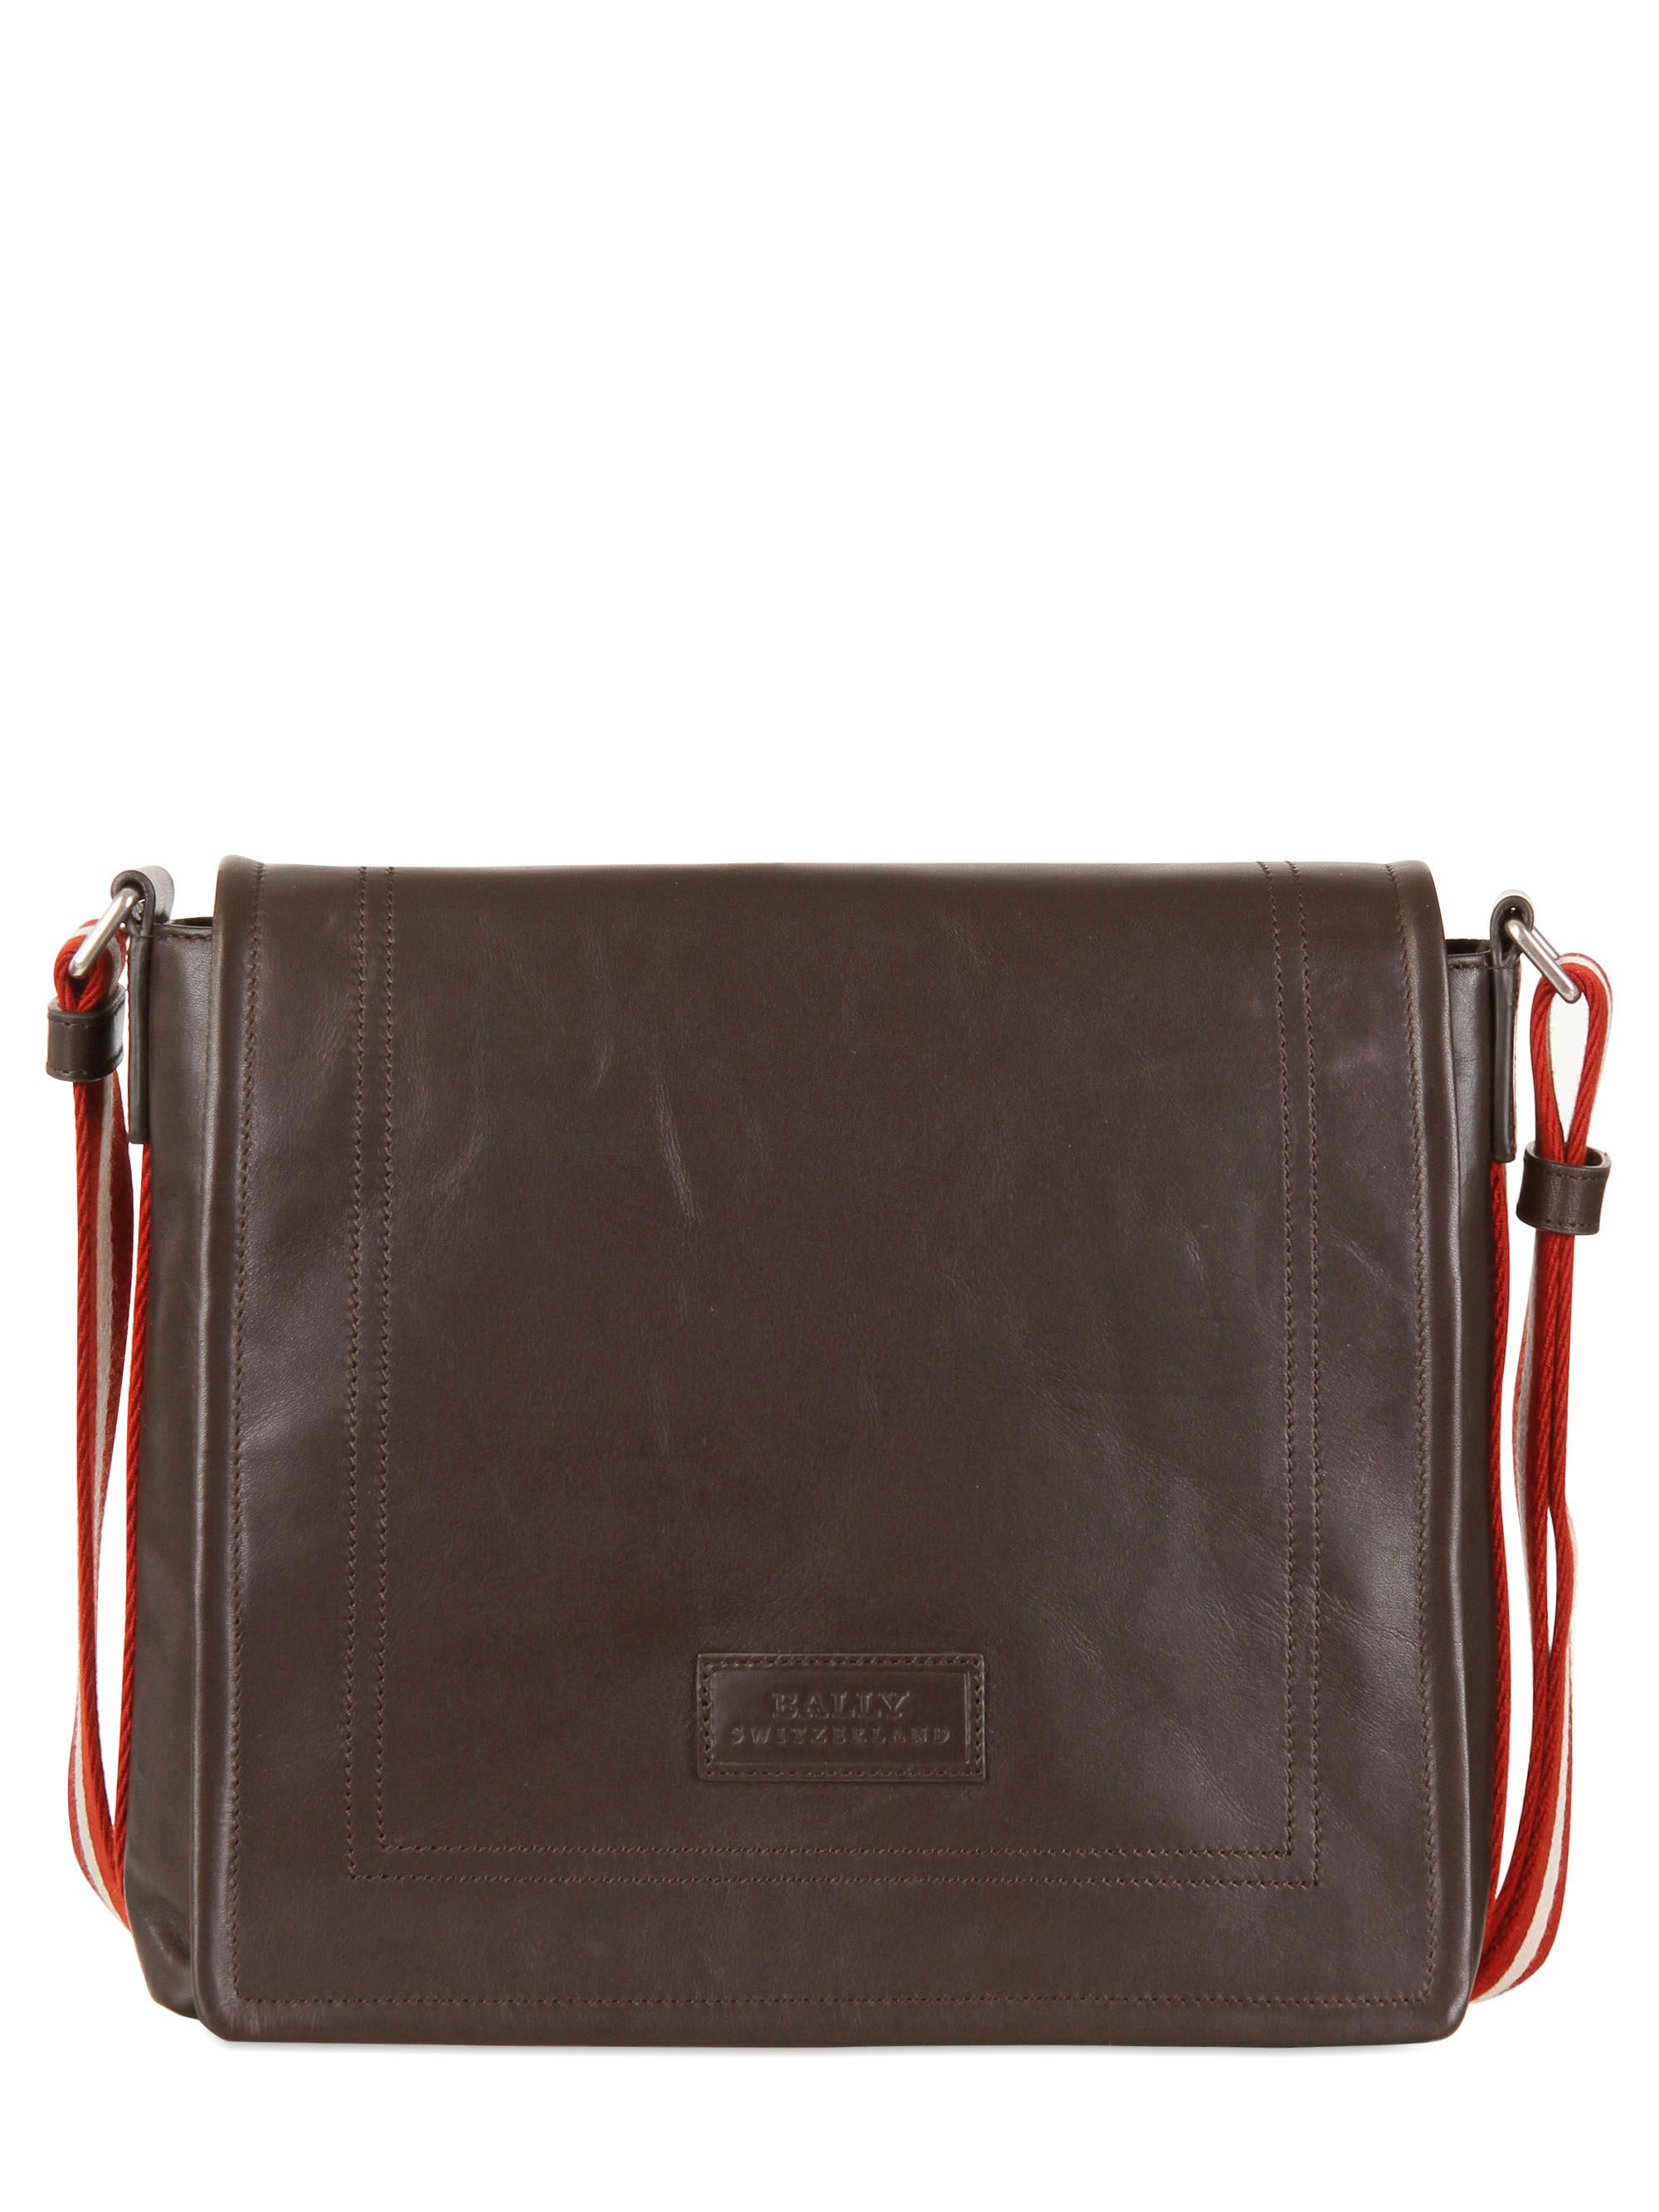 Lyst - Bally Leather Messenger Bag in Brown for Men